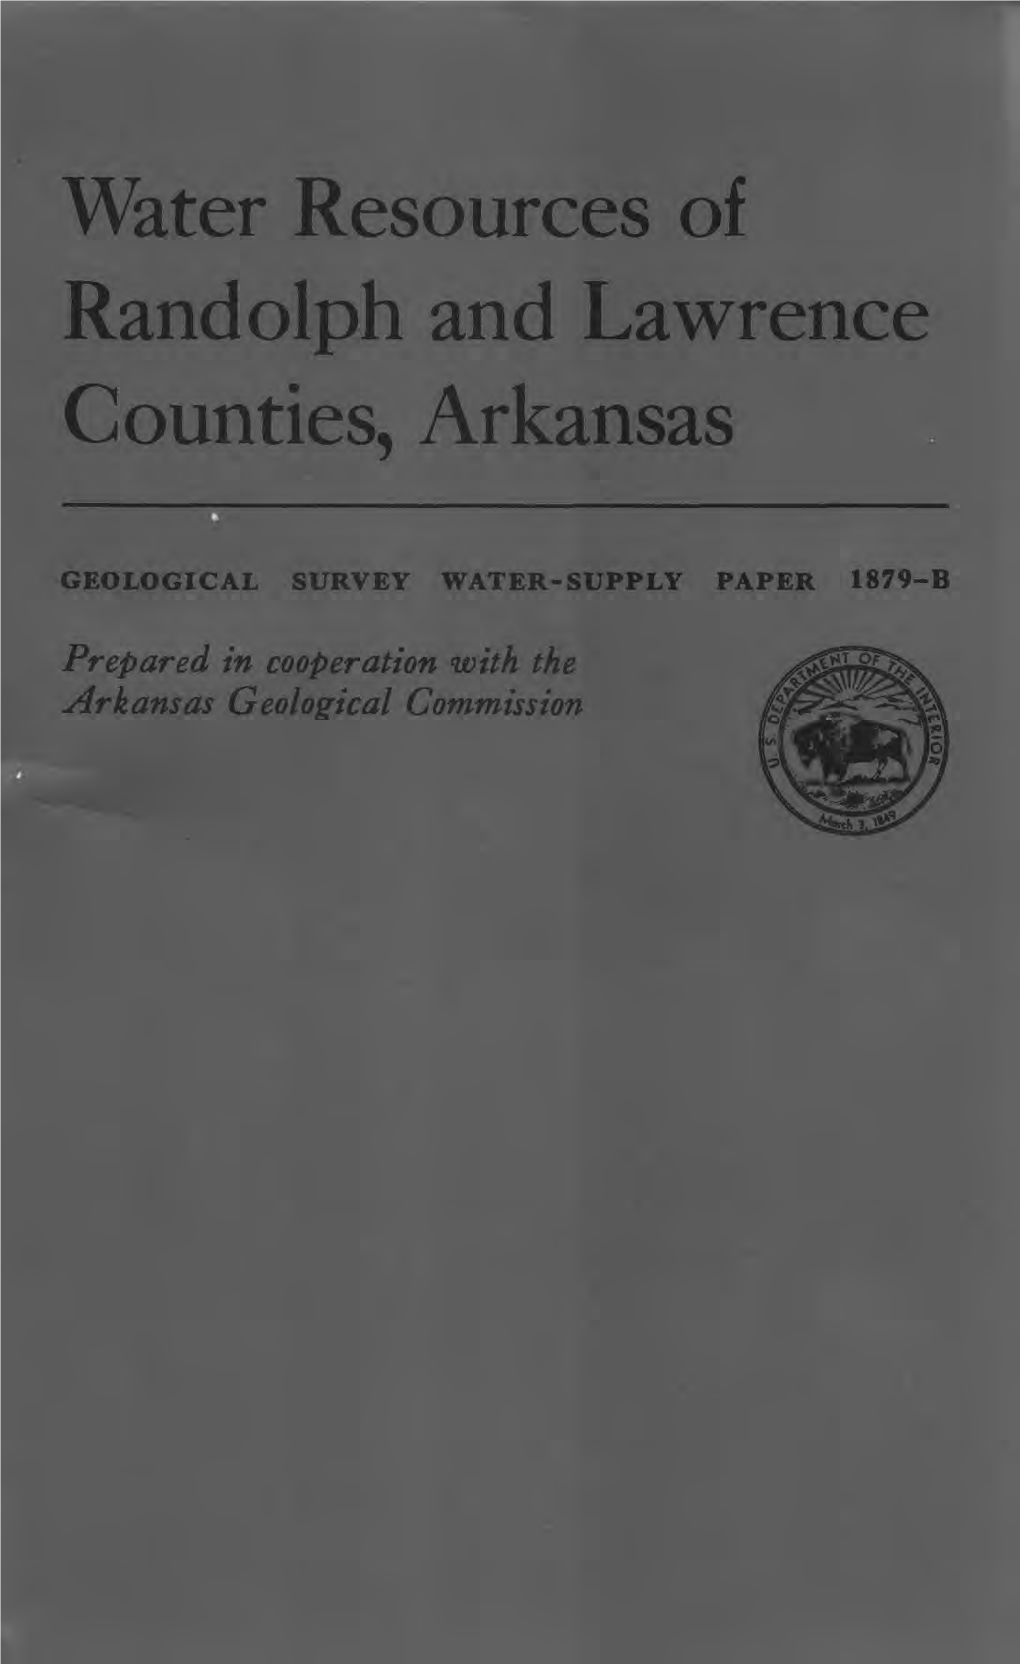 Water Resources of Randolph and Lawrence Counties, Arkansas